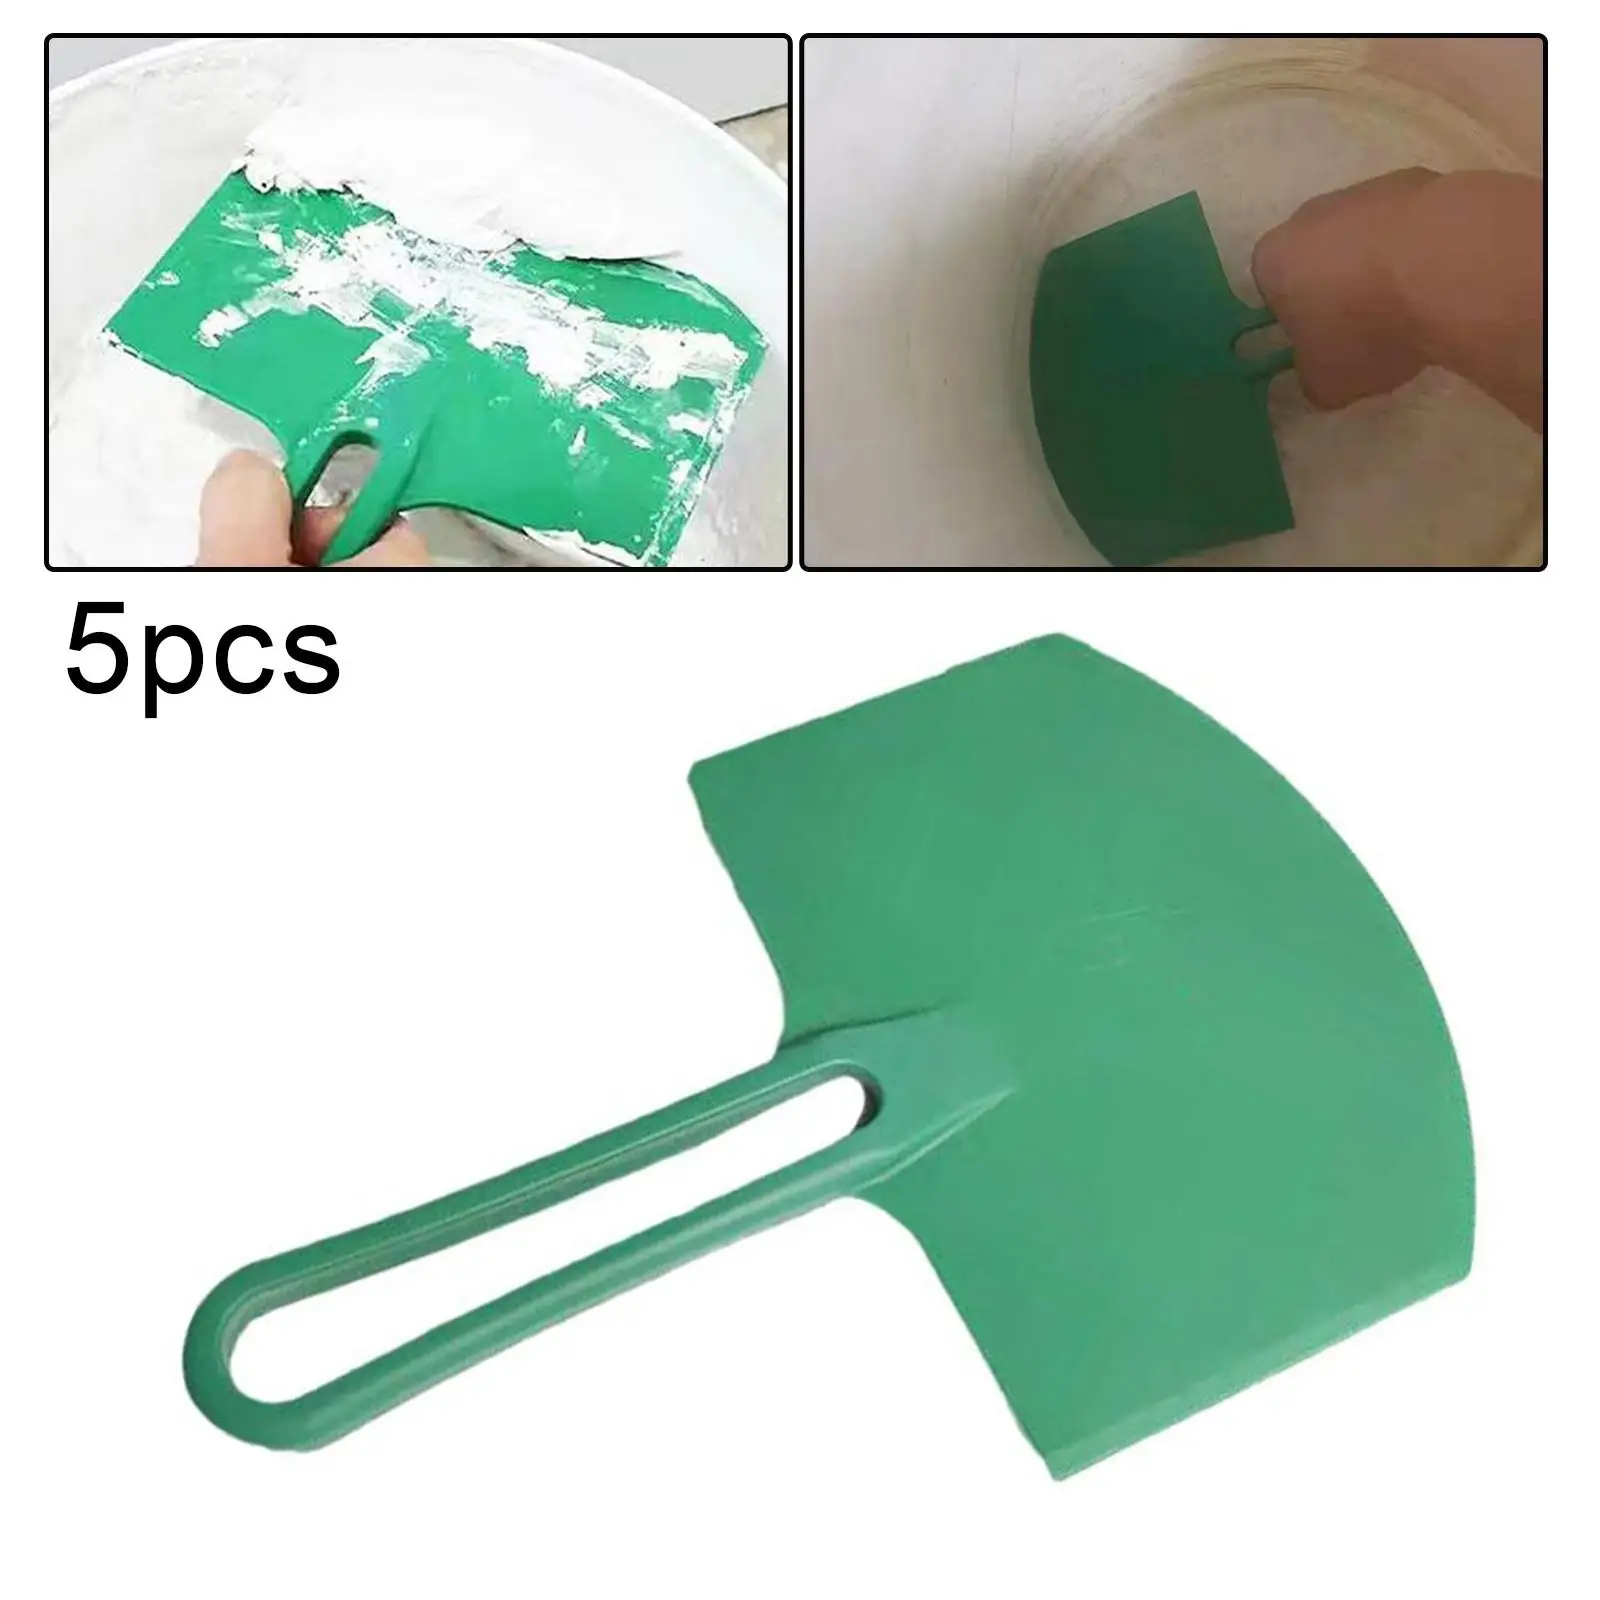 Plastic Paint Scrapers Putty Scraper Tool Putty Knife Scraper Spreader for Repairing Wall Home Painting